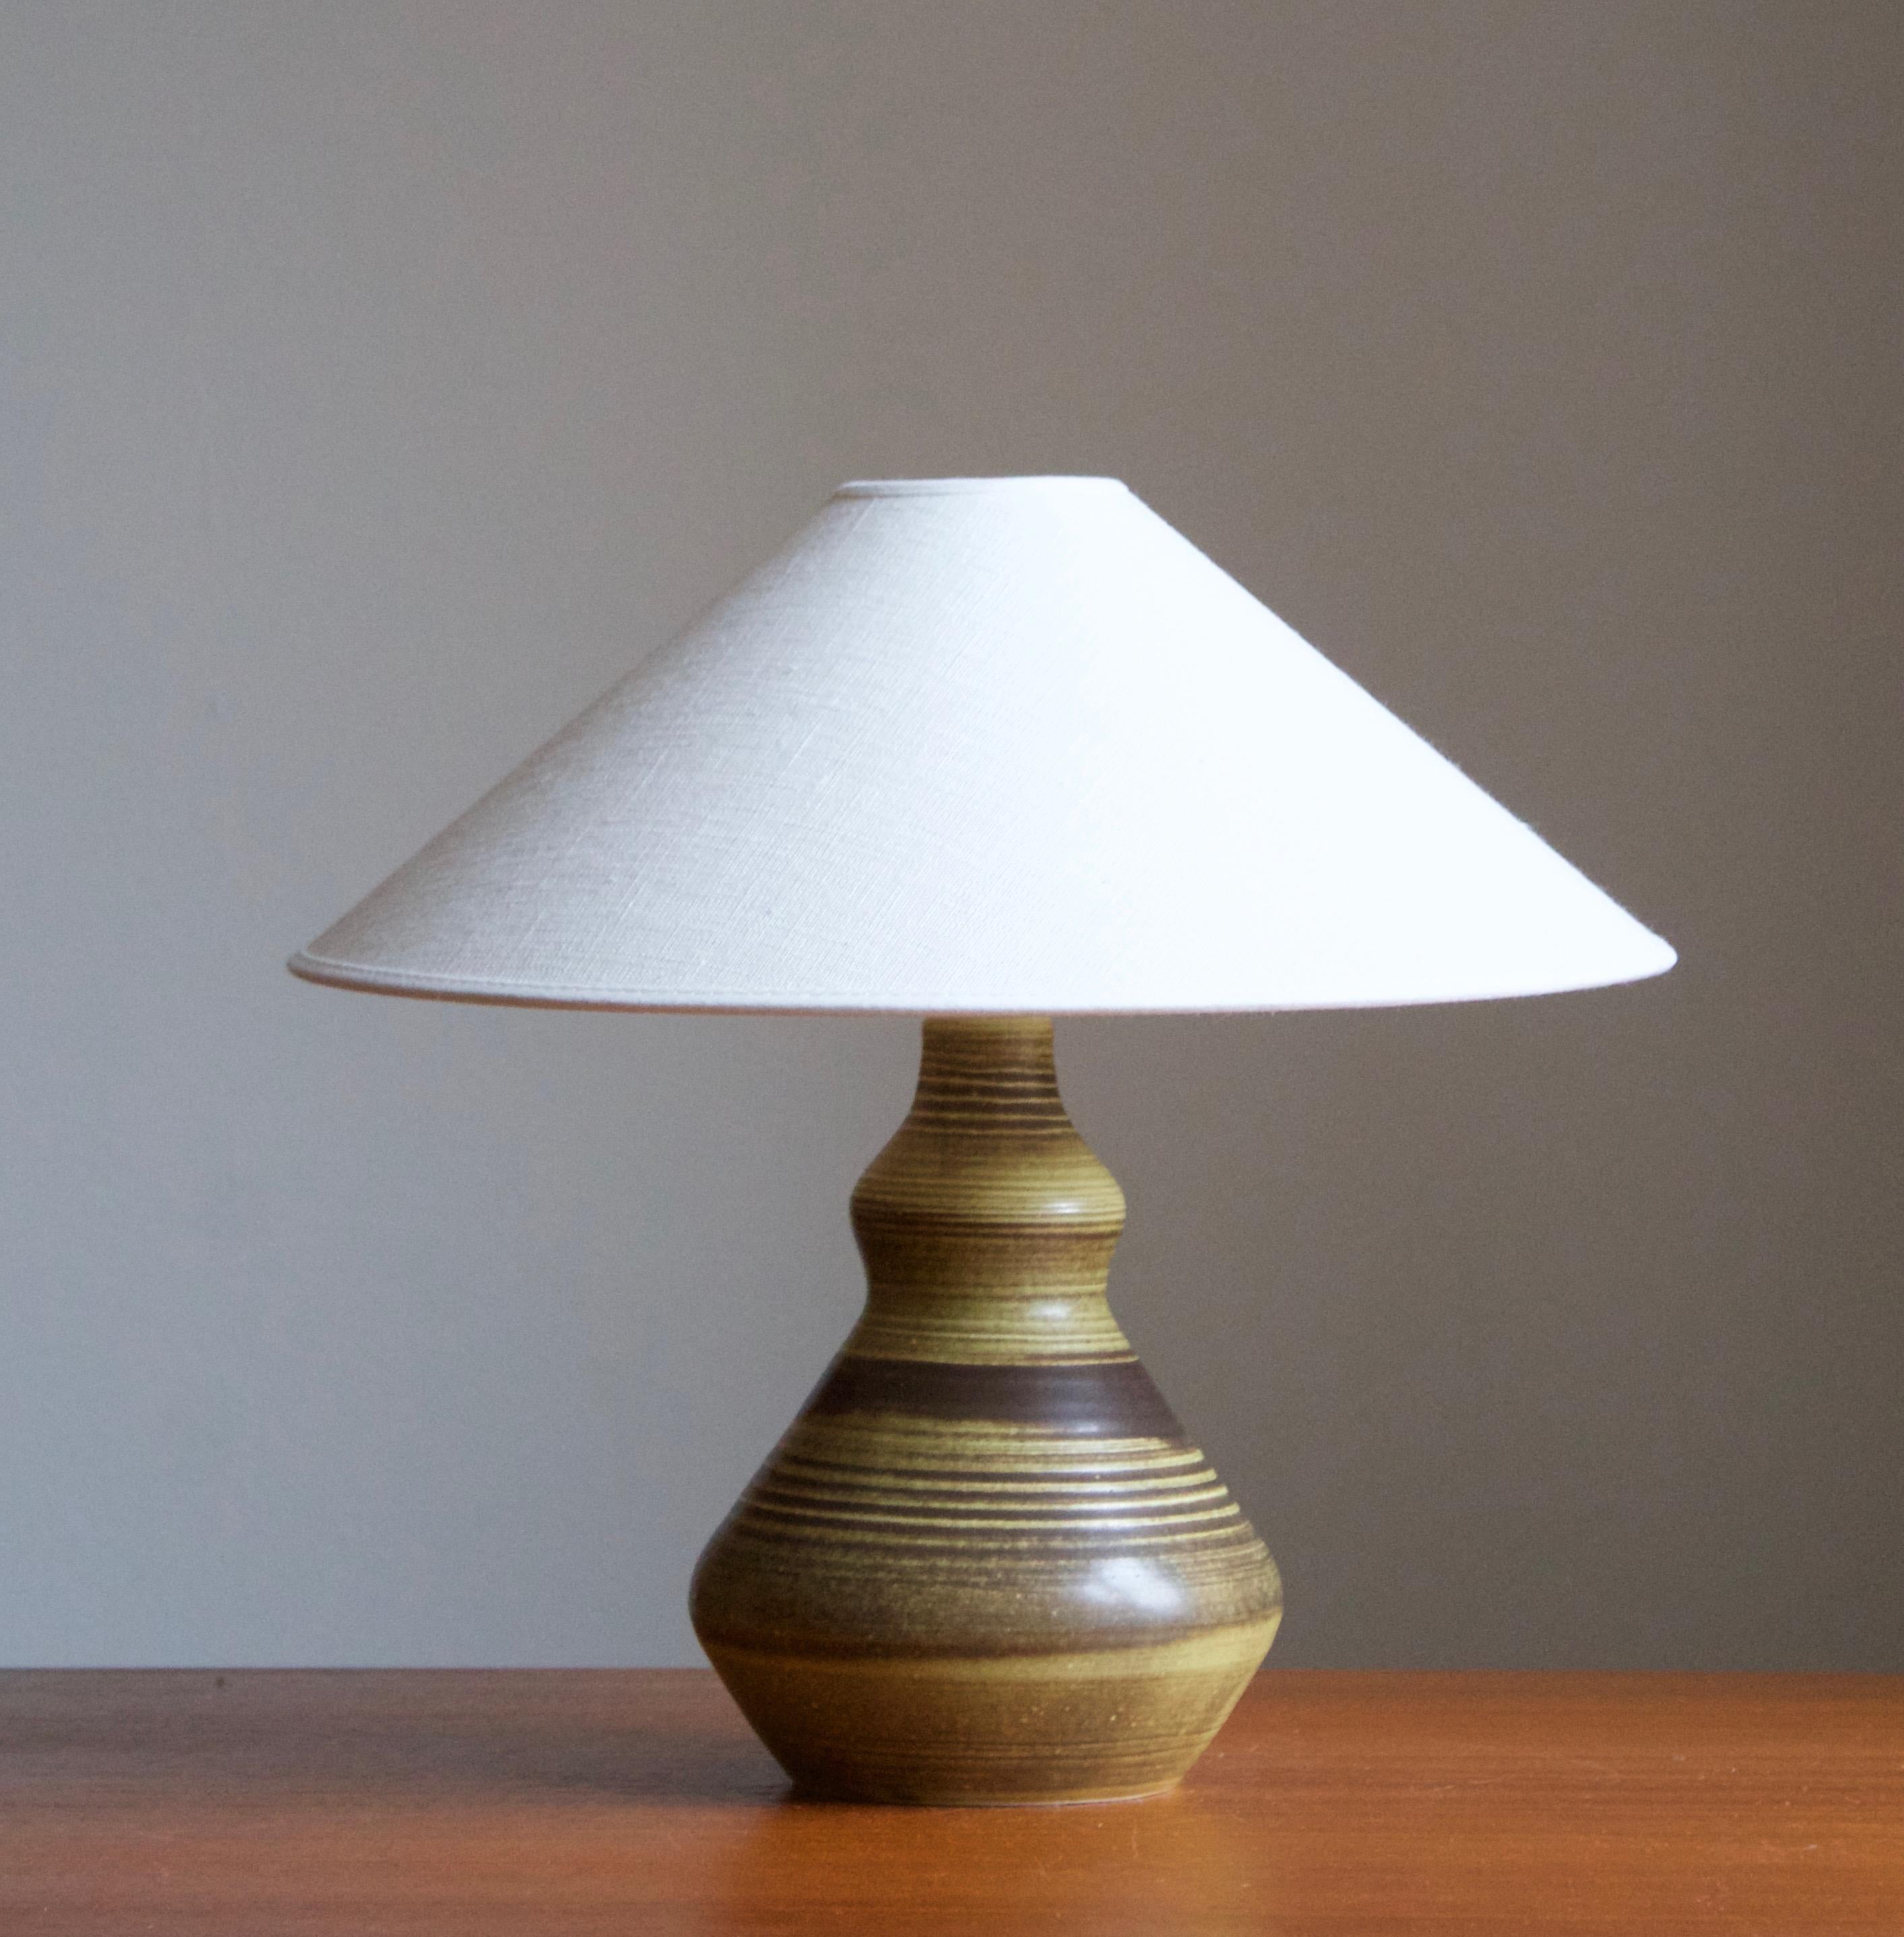 A stoneware table lamp, executed by Astrid Nordgren, Studio, Norway, 1979. Signed at bottom. With an artistic glaze and finely incised decor.

Stated dimensions exclude lampshade. Height including socket. Sold without lampshade.

Glaze features